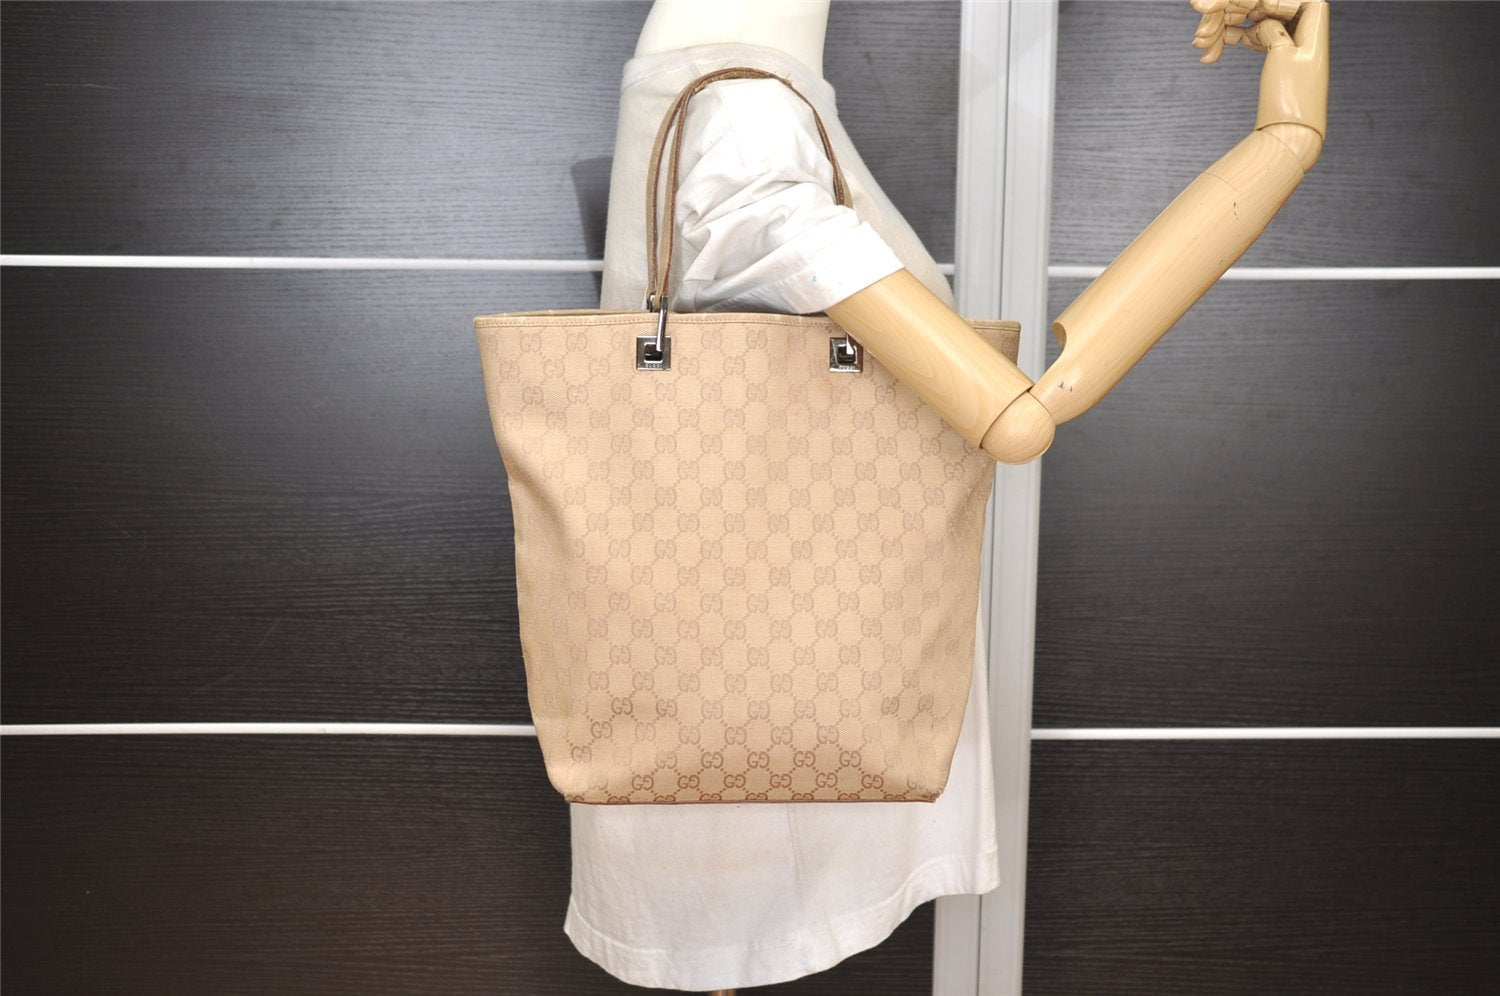 Authentic GUCCI Shoulder Hand Tote Bag GG Canvas Leather 31243 Beige 2252J